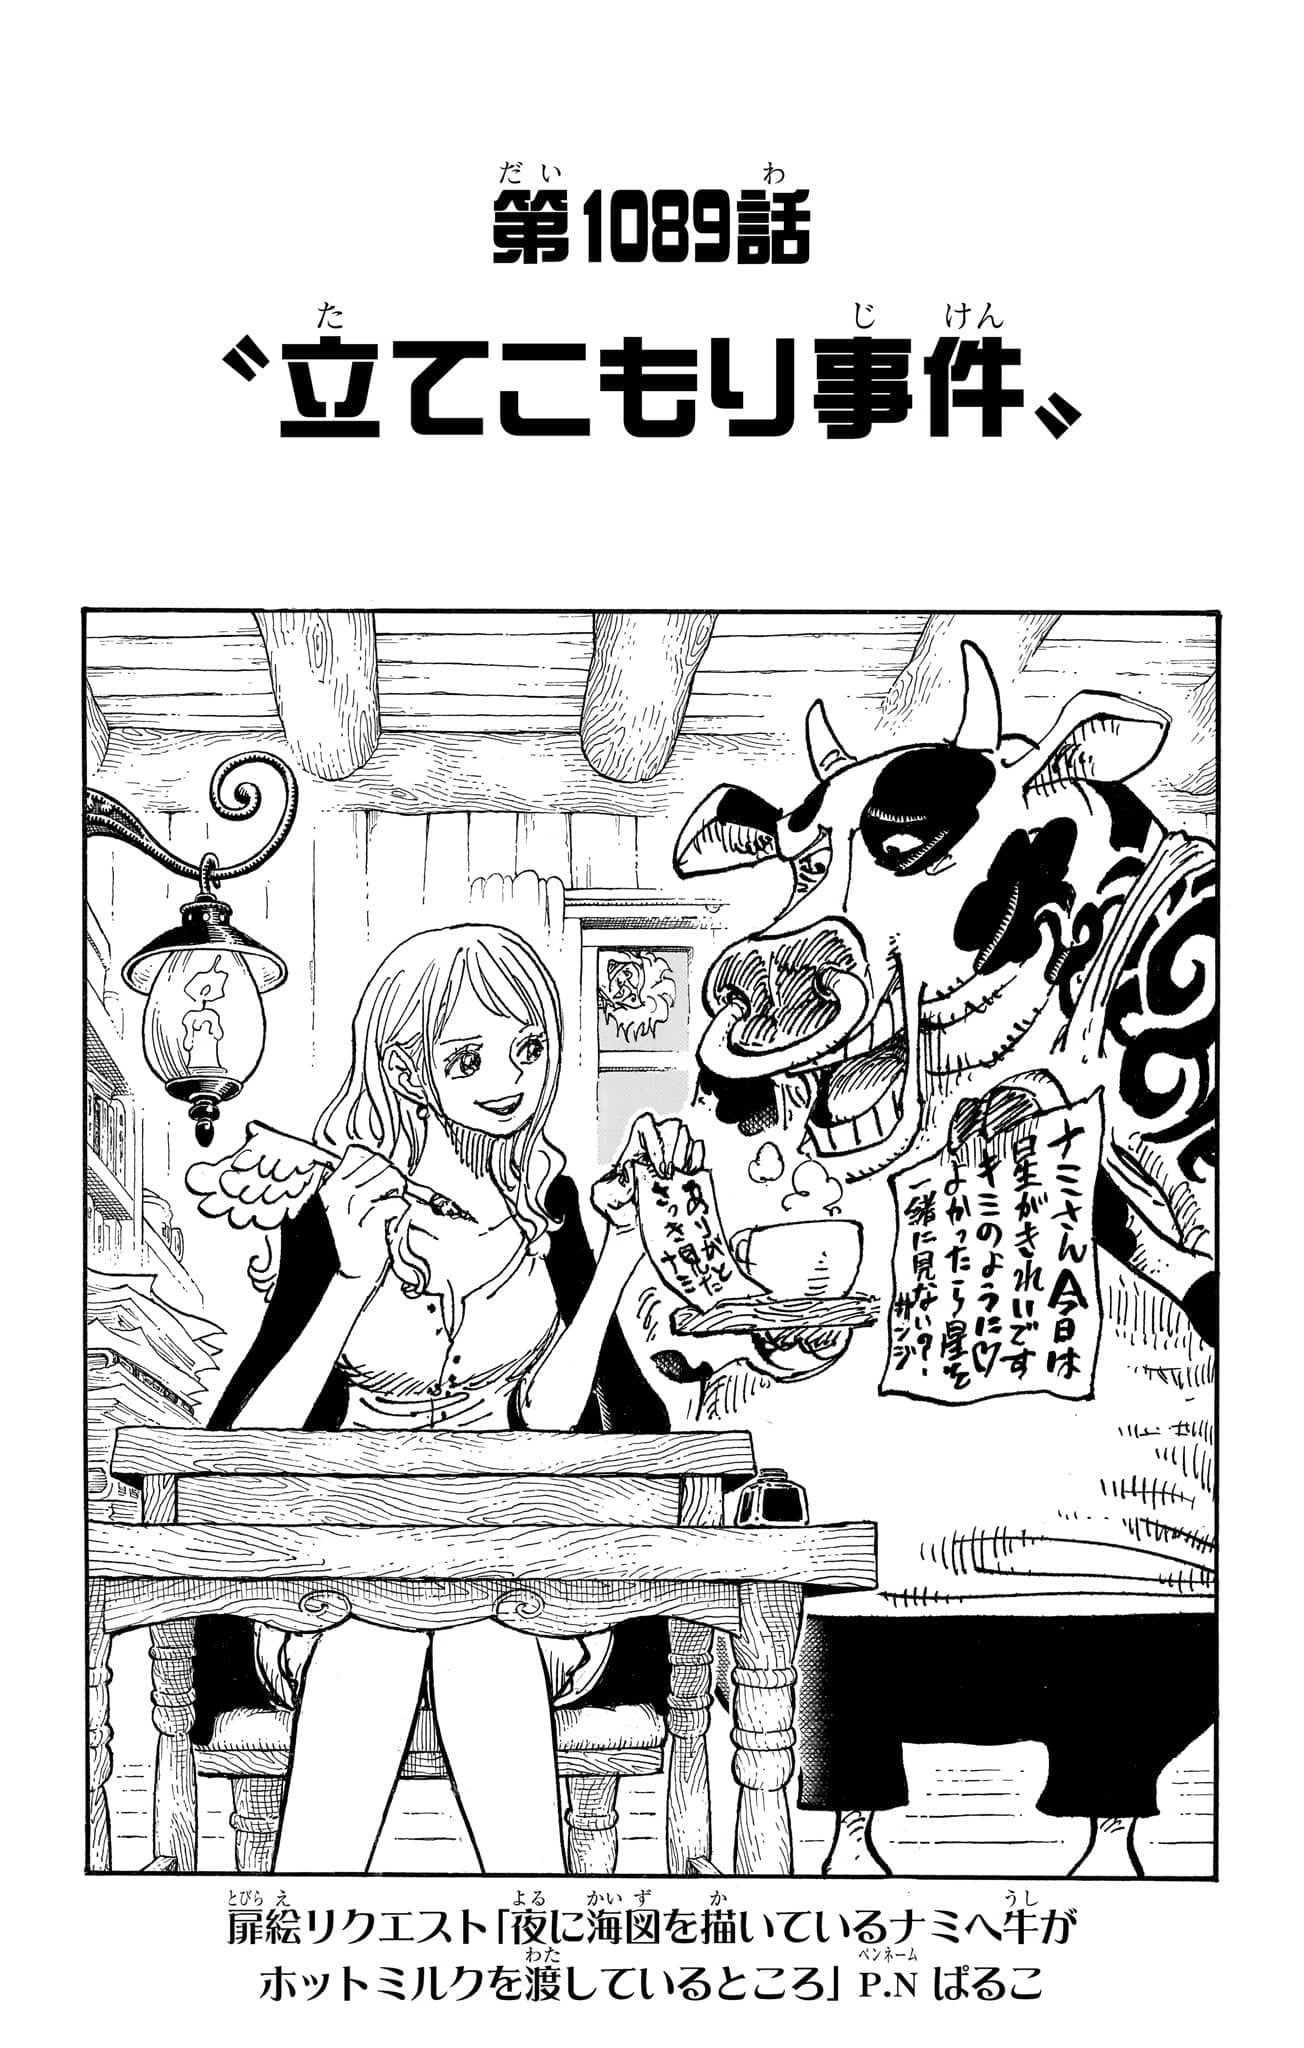 One Piece Chapter 1061 Reddit Spoilers, Count Down, English Raw